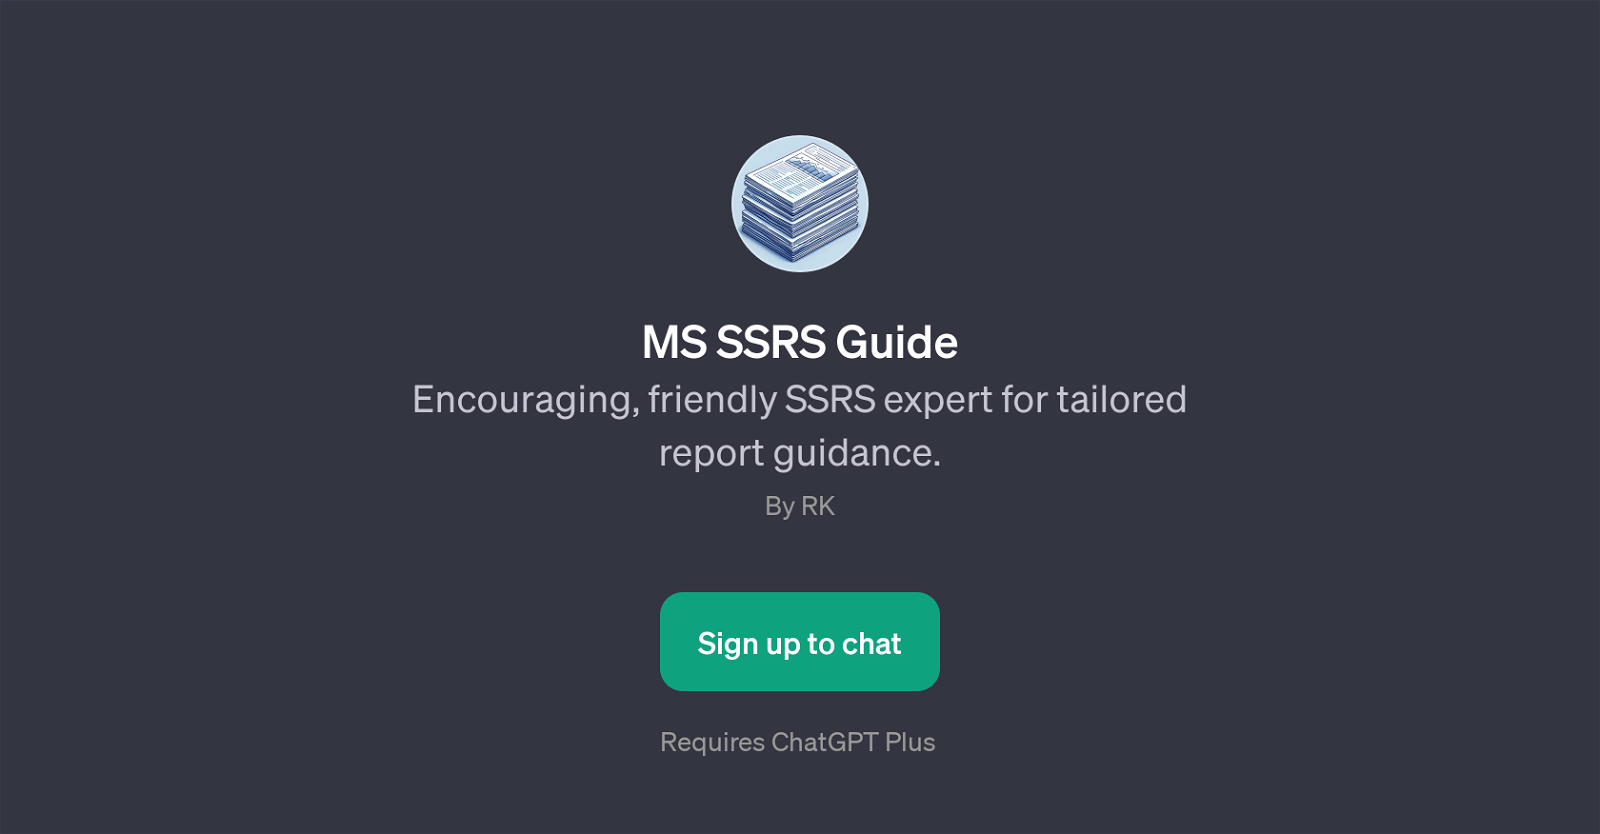 MS SSRS Guide website